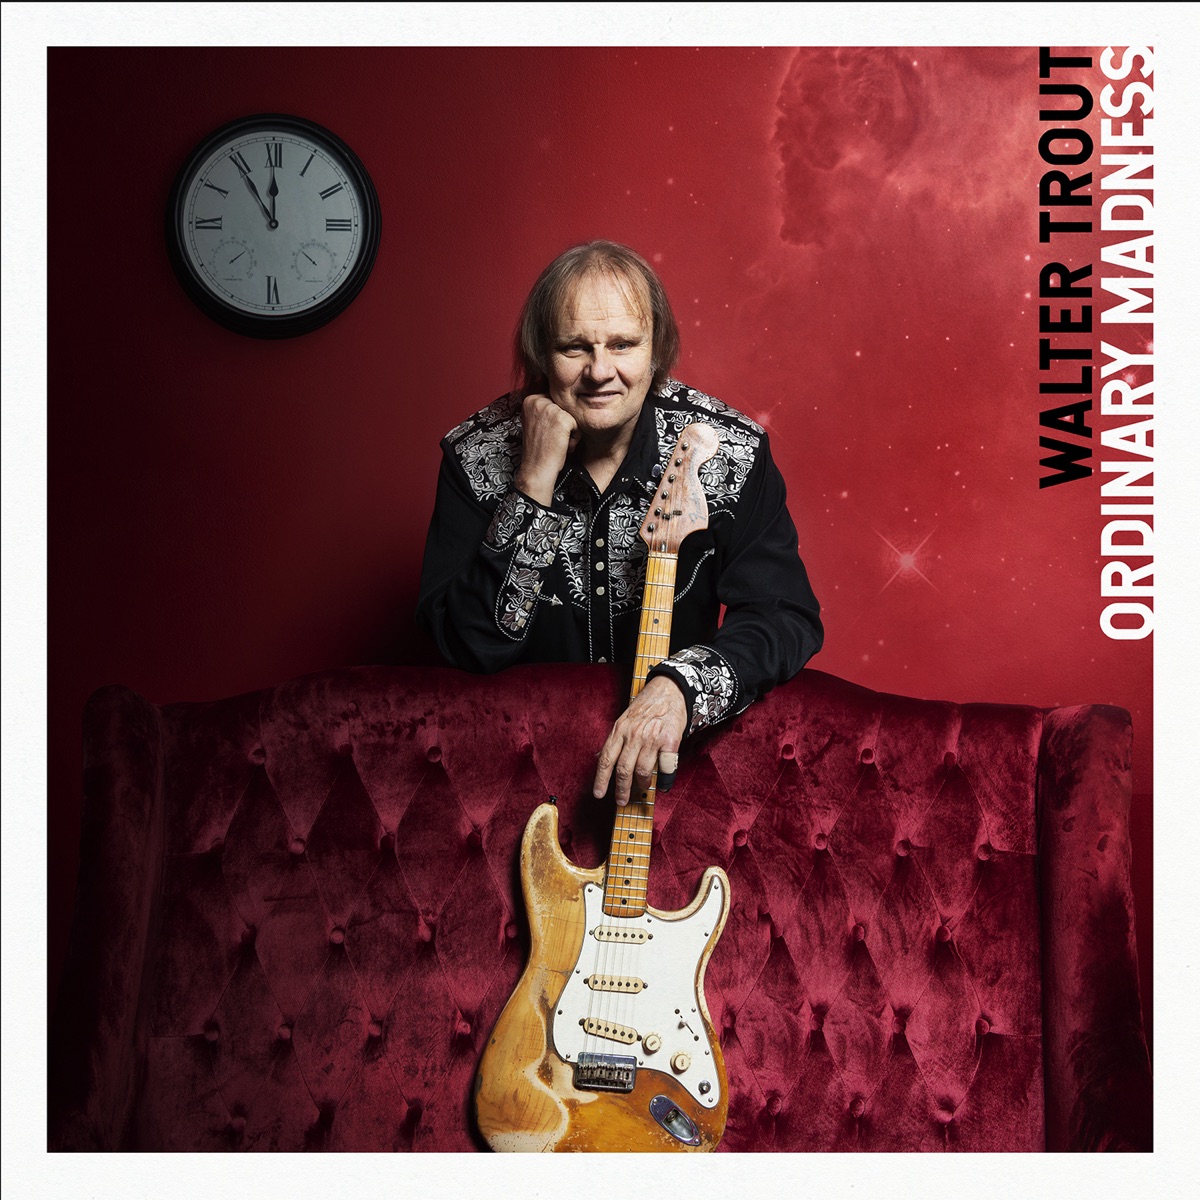 The Blues Came Callin' - Album by Walter Trout - Apple Music